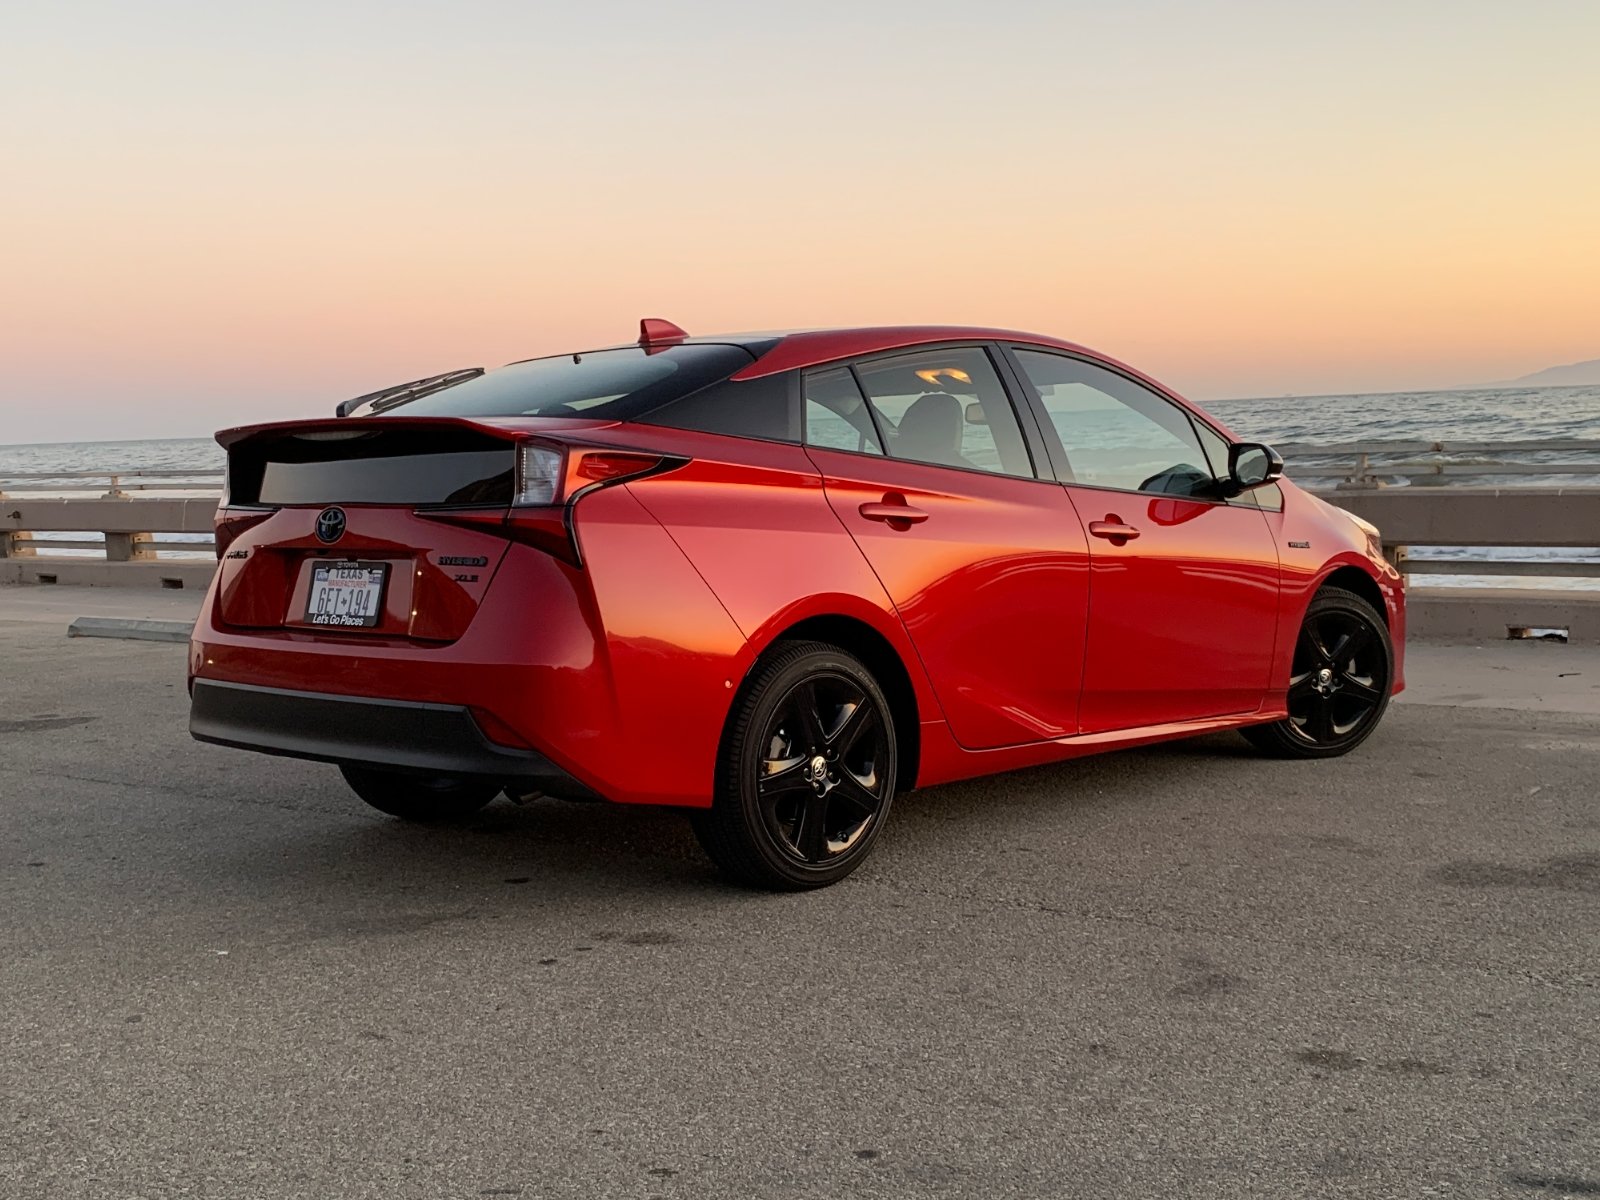 2021 Toyota Prius Test Drive Review costEffectivenessImage